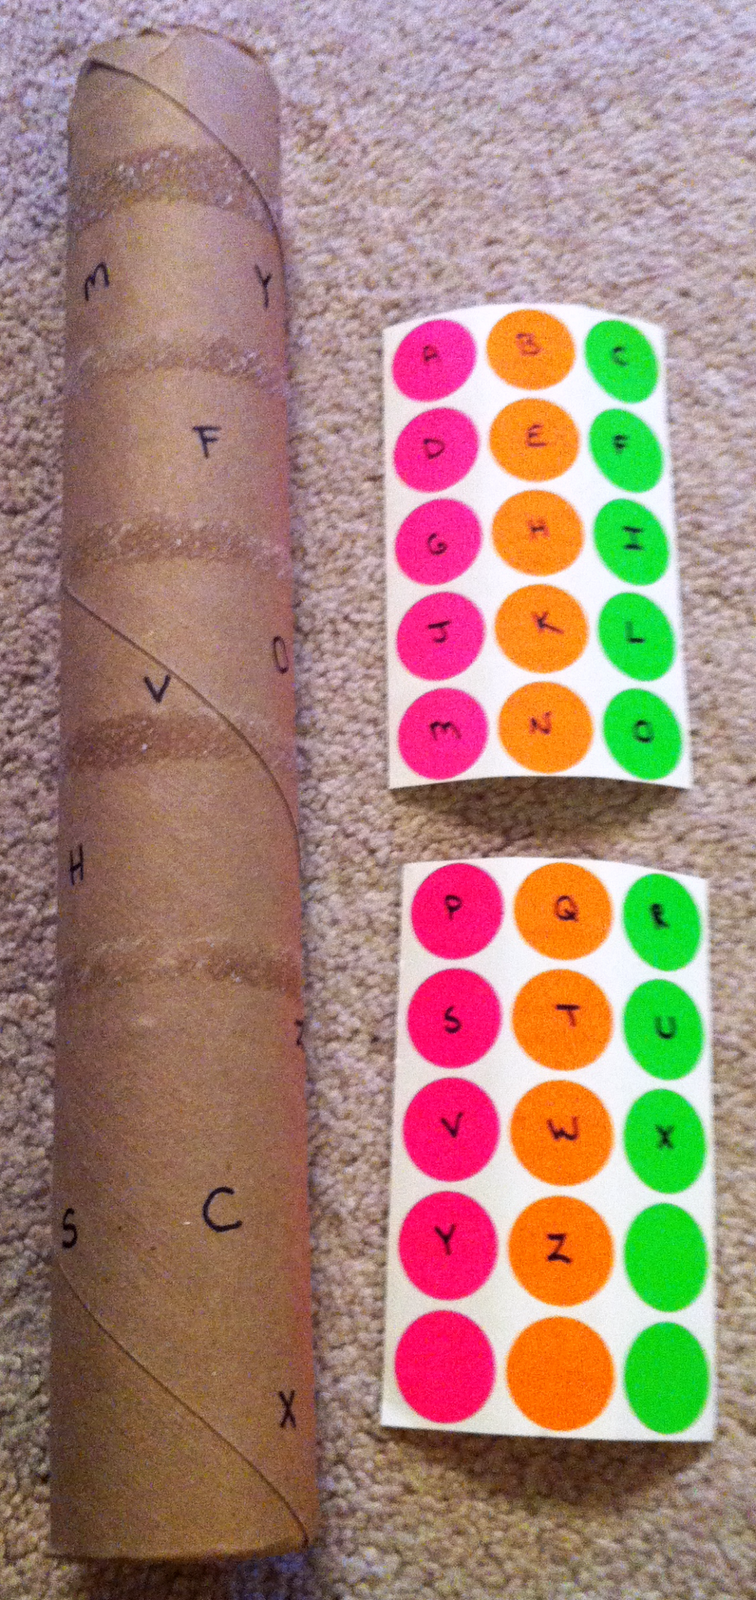 Write letters on tube and on stickers; kids have to match the stickers to the letters on the tube.